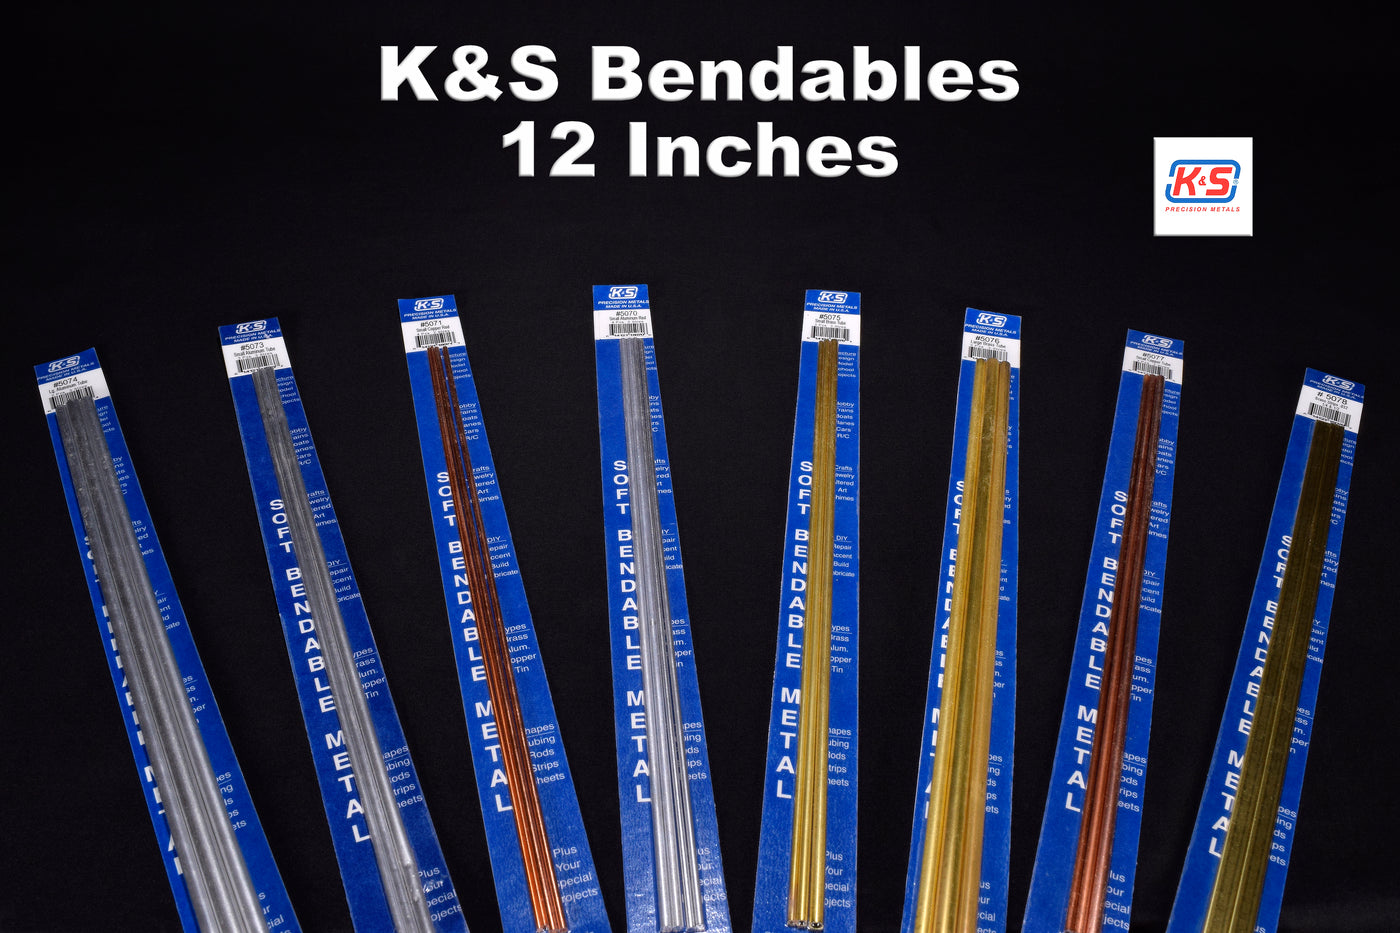 K&S Bendable Brass Tube 3/16, 7/32 and 1/4 1pc. Each